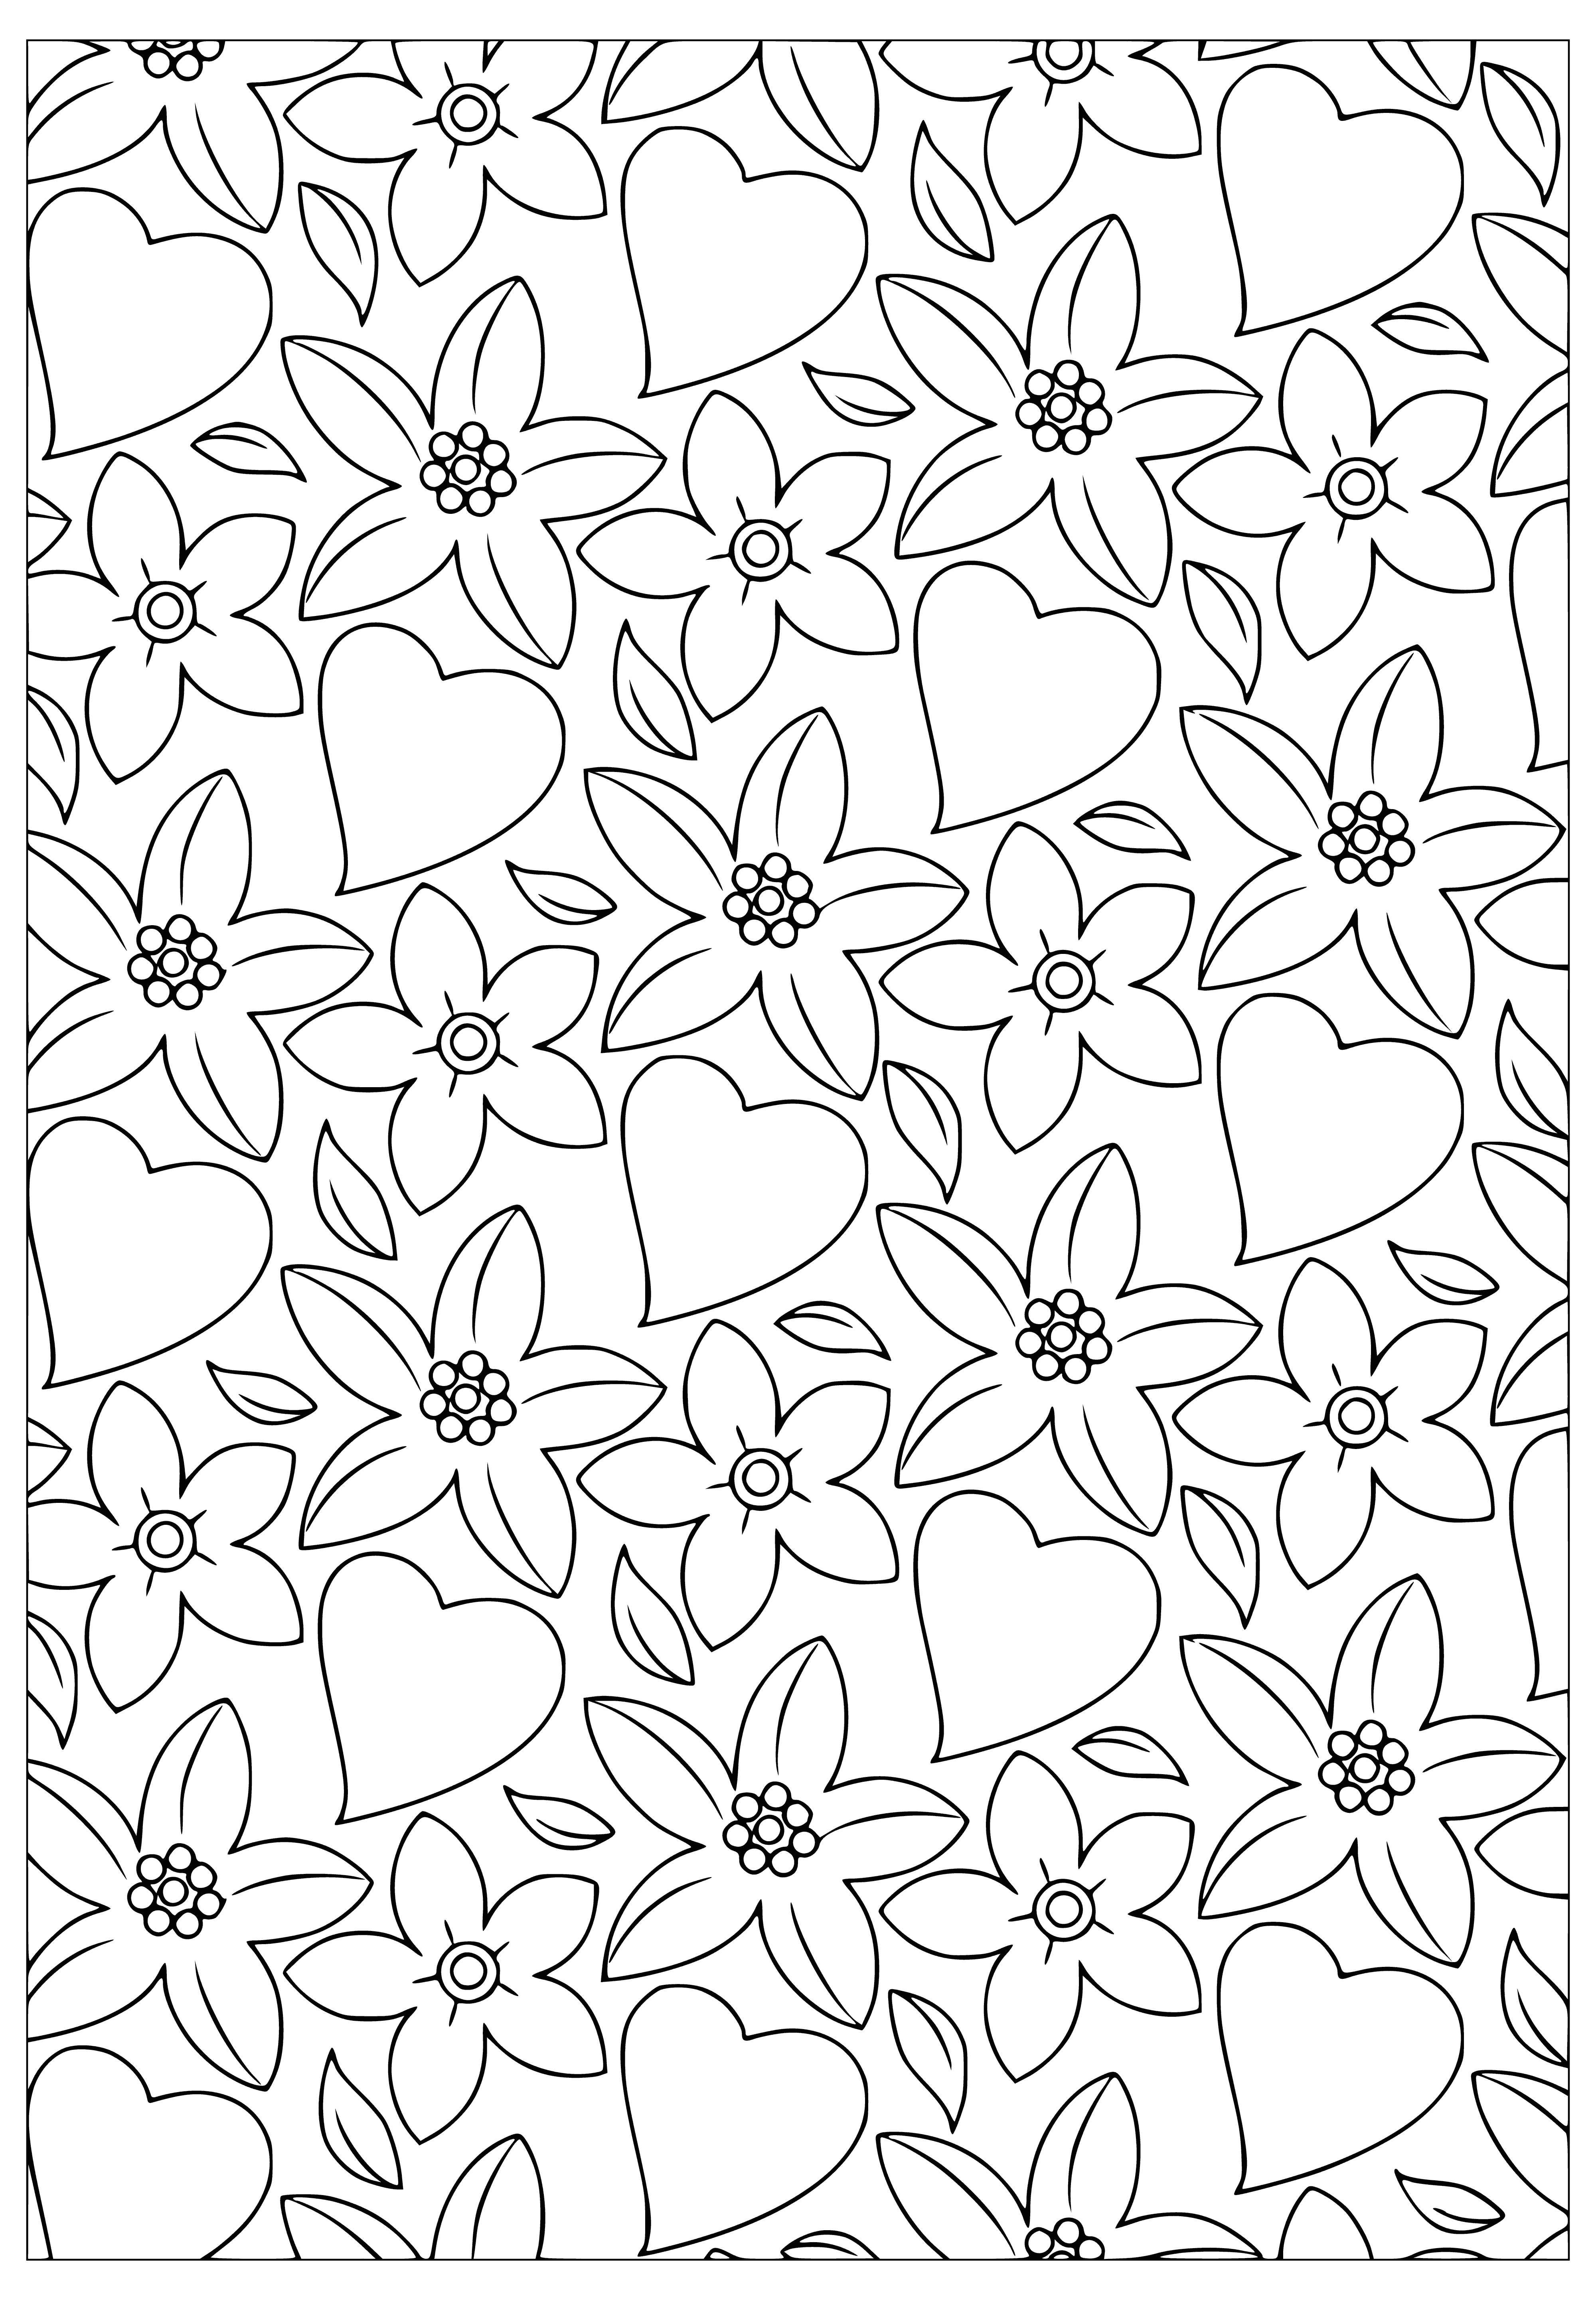 coloring page: Lots of hearts & flowers for Valentine's Day! Hearts in different colors & pink flowers, plus fancy red candles.